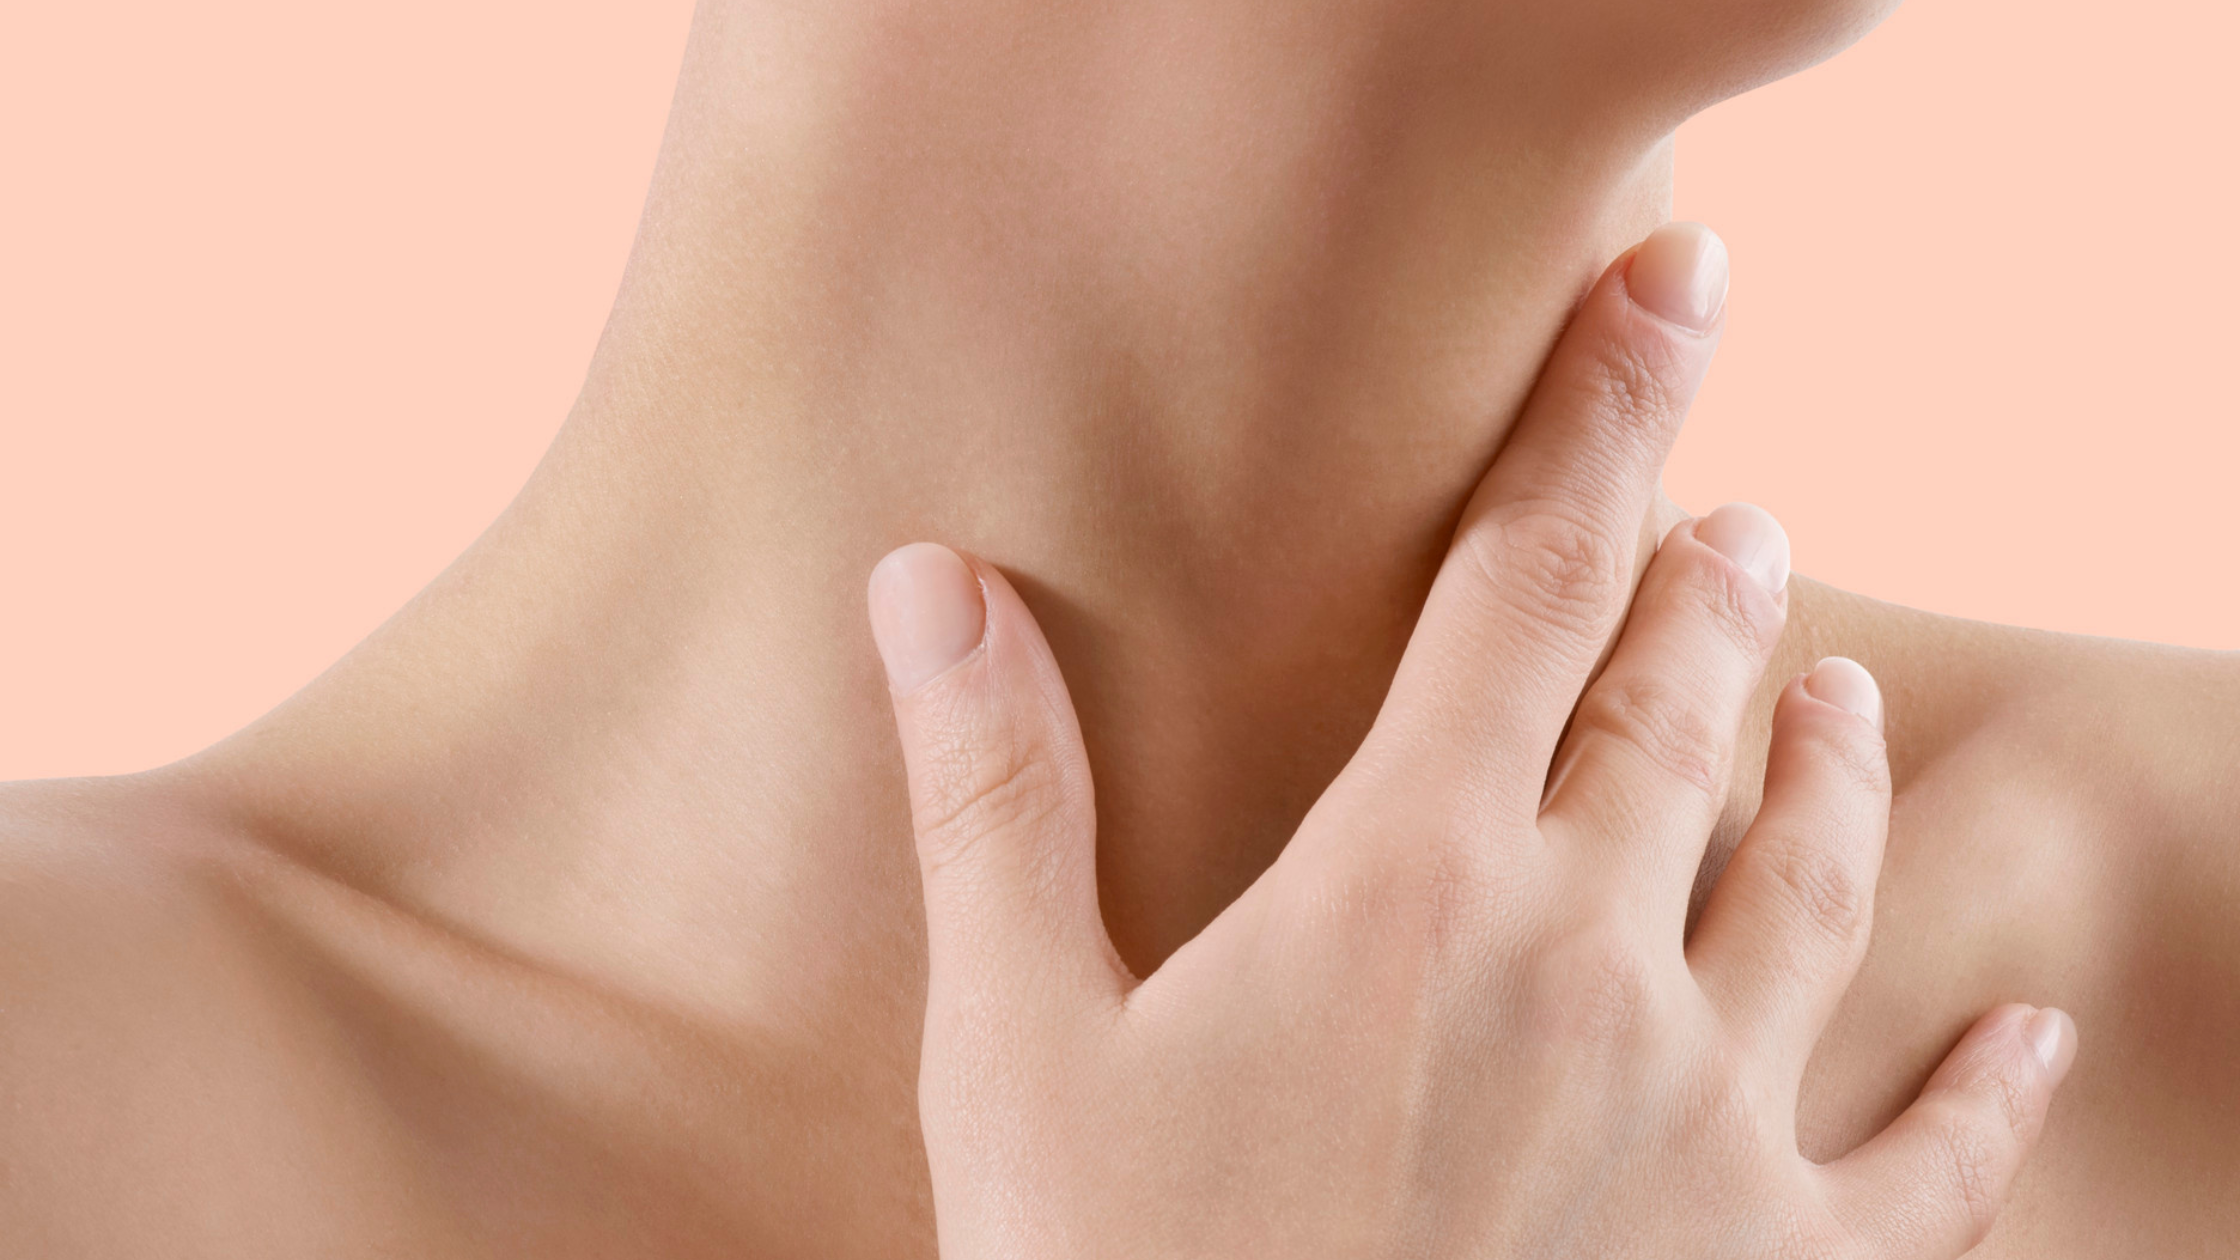 5 Nutrients to Support Thyroid Health